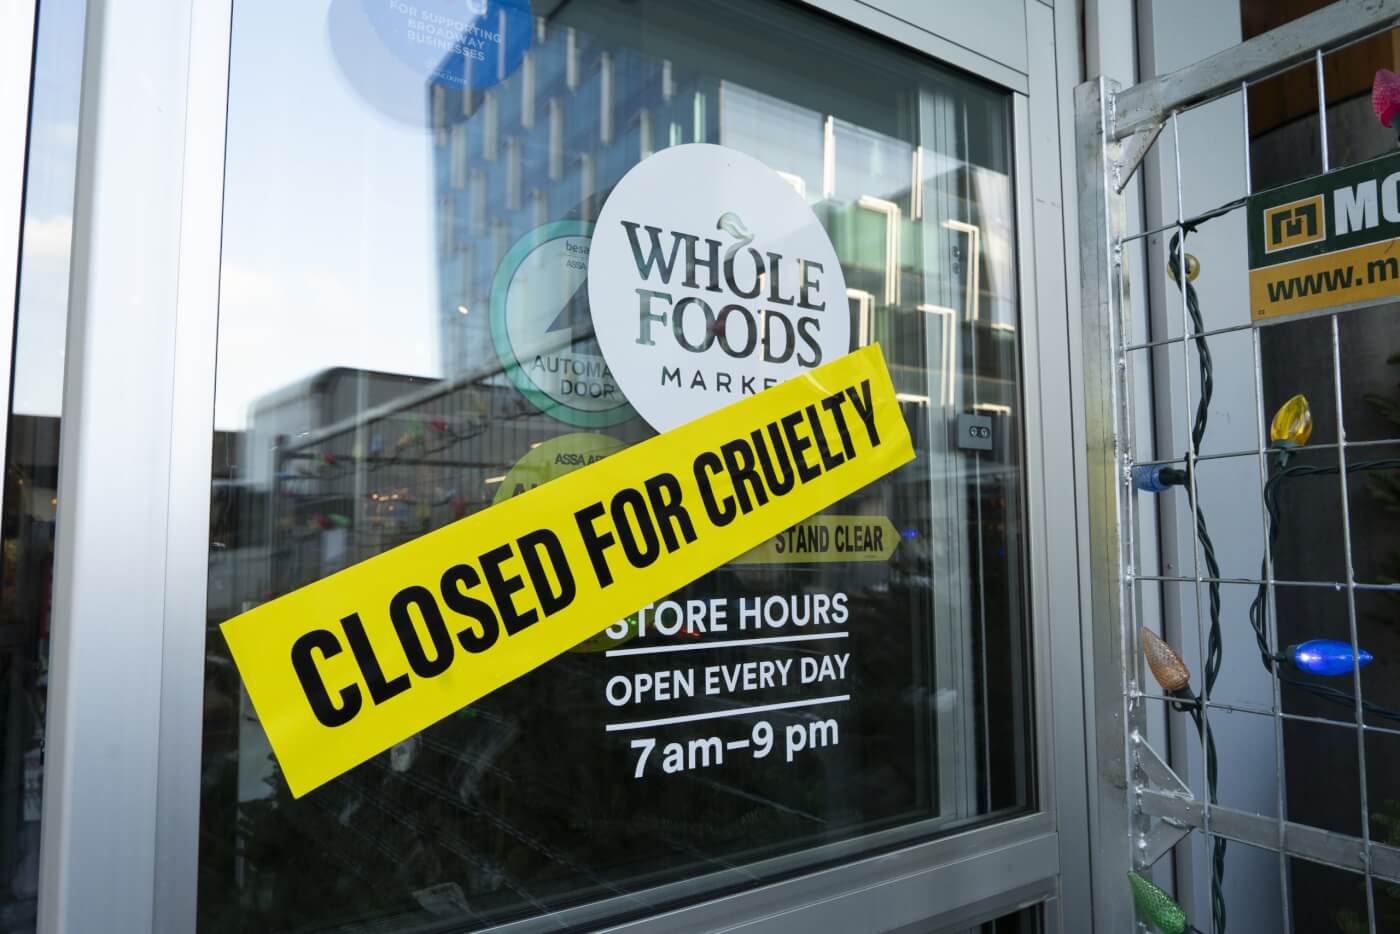 a "Closed for Cruelty" sign stretched across a Whole Foods store window in Vancouver, as part of a peaceful PETA demonstration protesting coconut milk from Thailand